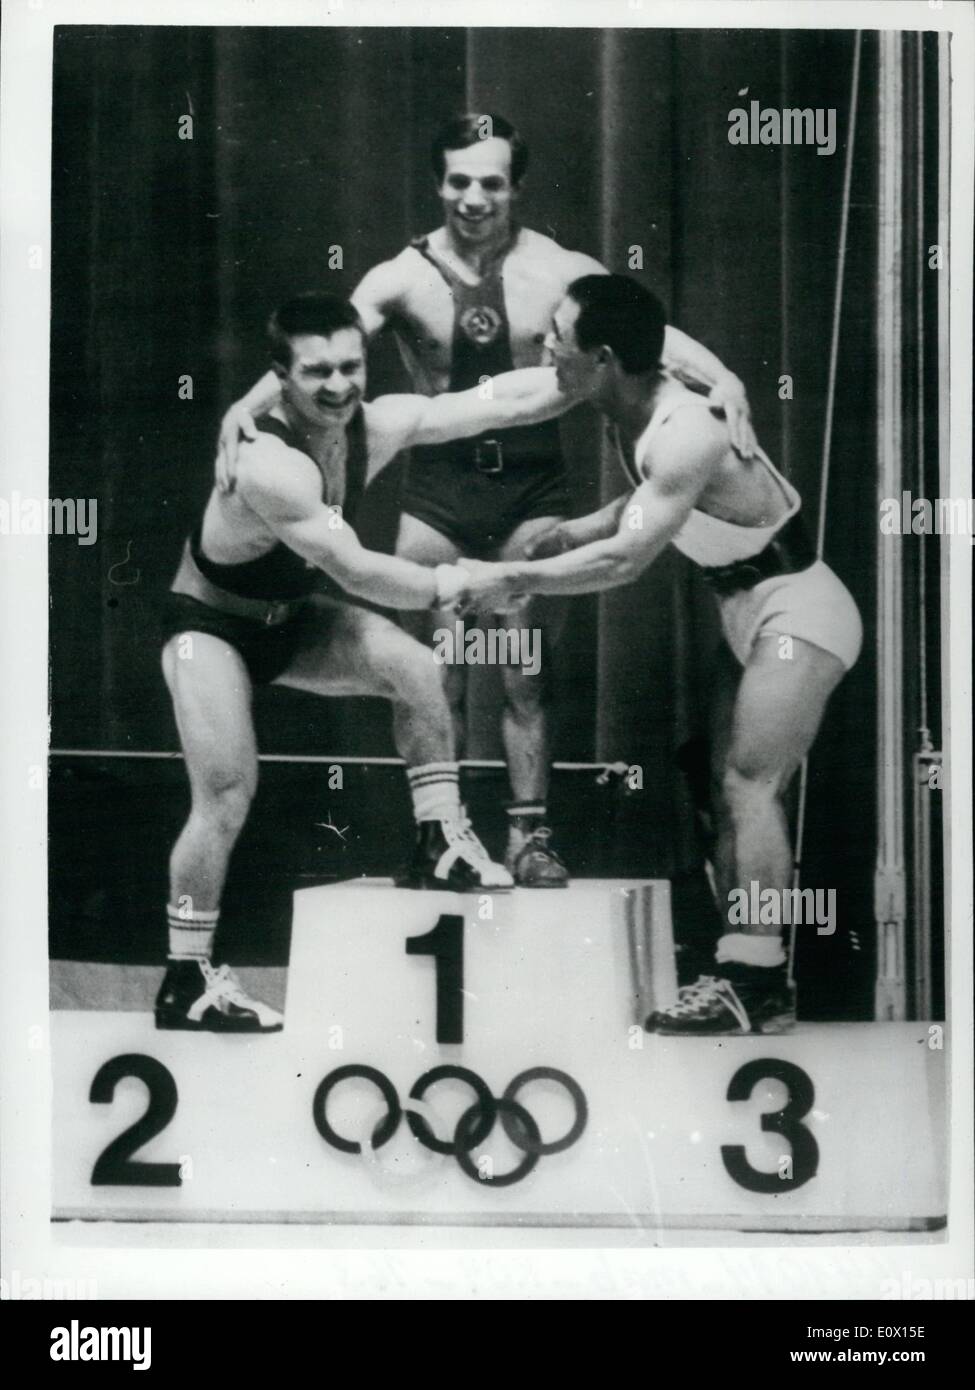 Oct. 10, 1964 - Olympic Games In Tokio USSR Weightlifter Wins First Gold Medal: Photo shows. Medalists at the Olympic weightlifting competition at the Shibuy Public Hall, Tokio, congratulate each other. They are (L. to R.) Imre Foldi, of Hungary (silver medal), Alexei Vakhonin, of the U.S.S.R. (Gold Medal) and Shiro Ichinoseki, of Japan (Bronze Medal). Vakhonin broke the world record with 142.4 kgs. Stock Photo